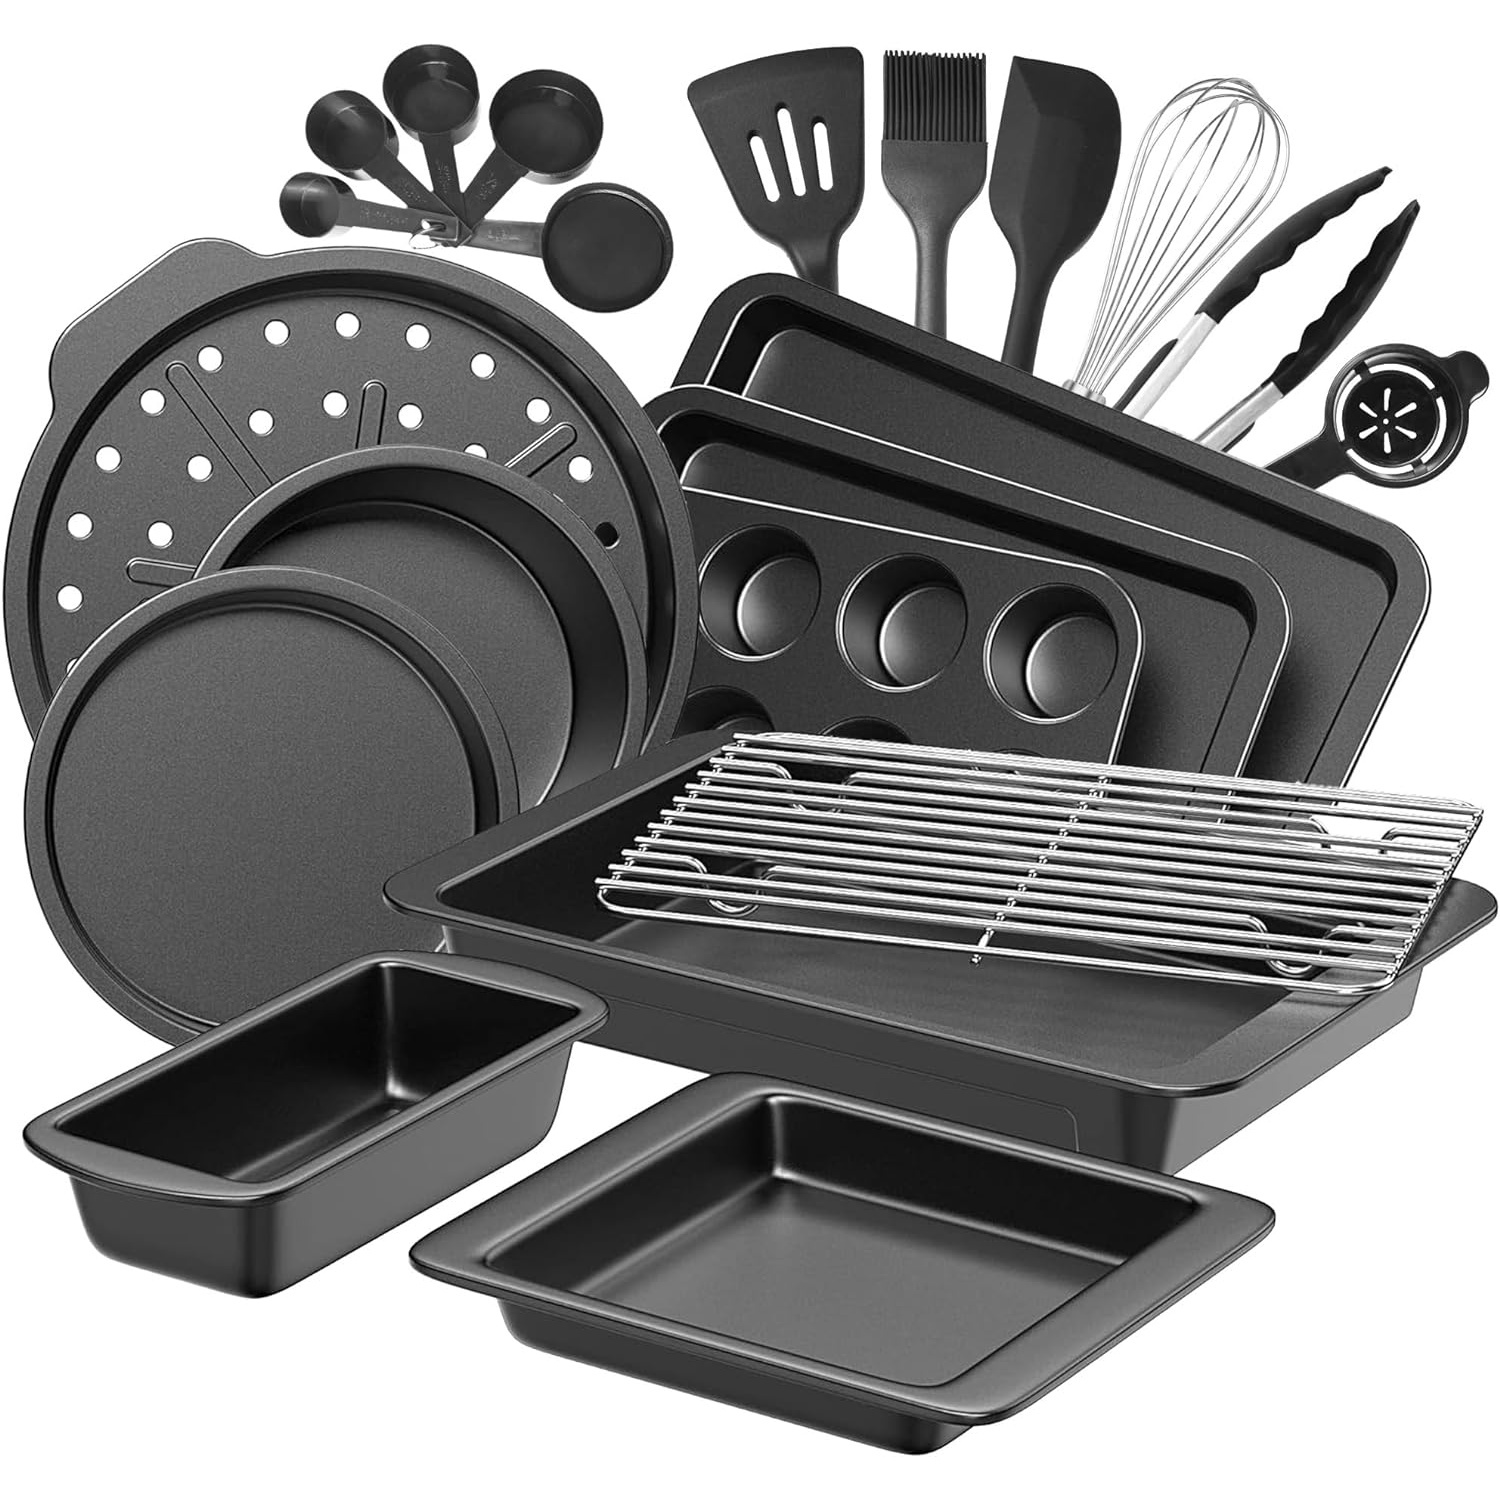 

Hongbake Bakeware Sets, Baking Pans Set With Kitchen Utensils, Nonstick Oven Pan With Wider Grips, 17 Pieces Including Rack, Cookie Sheet, Cake, Loaf, Muffin, Pizza Pan